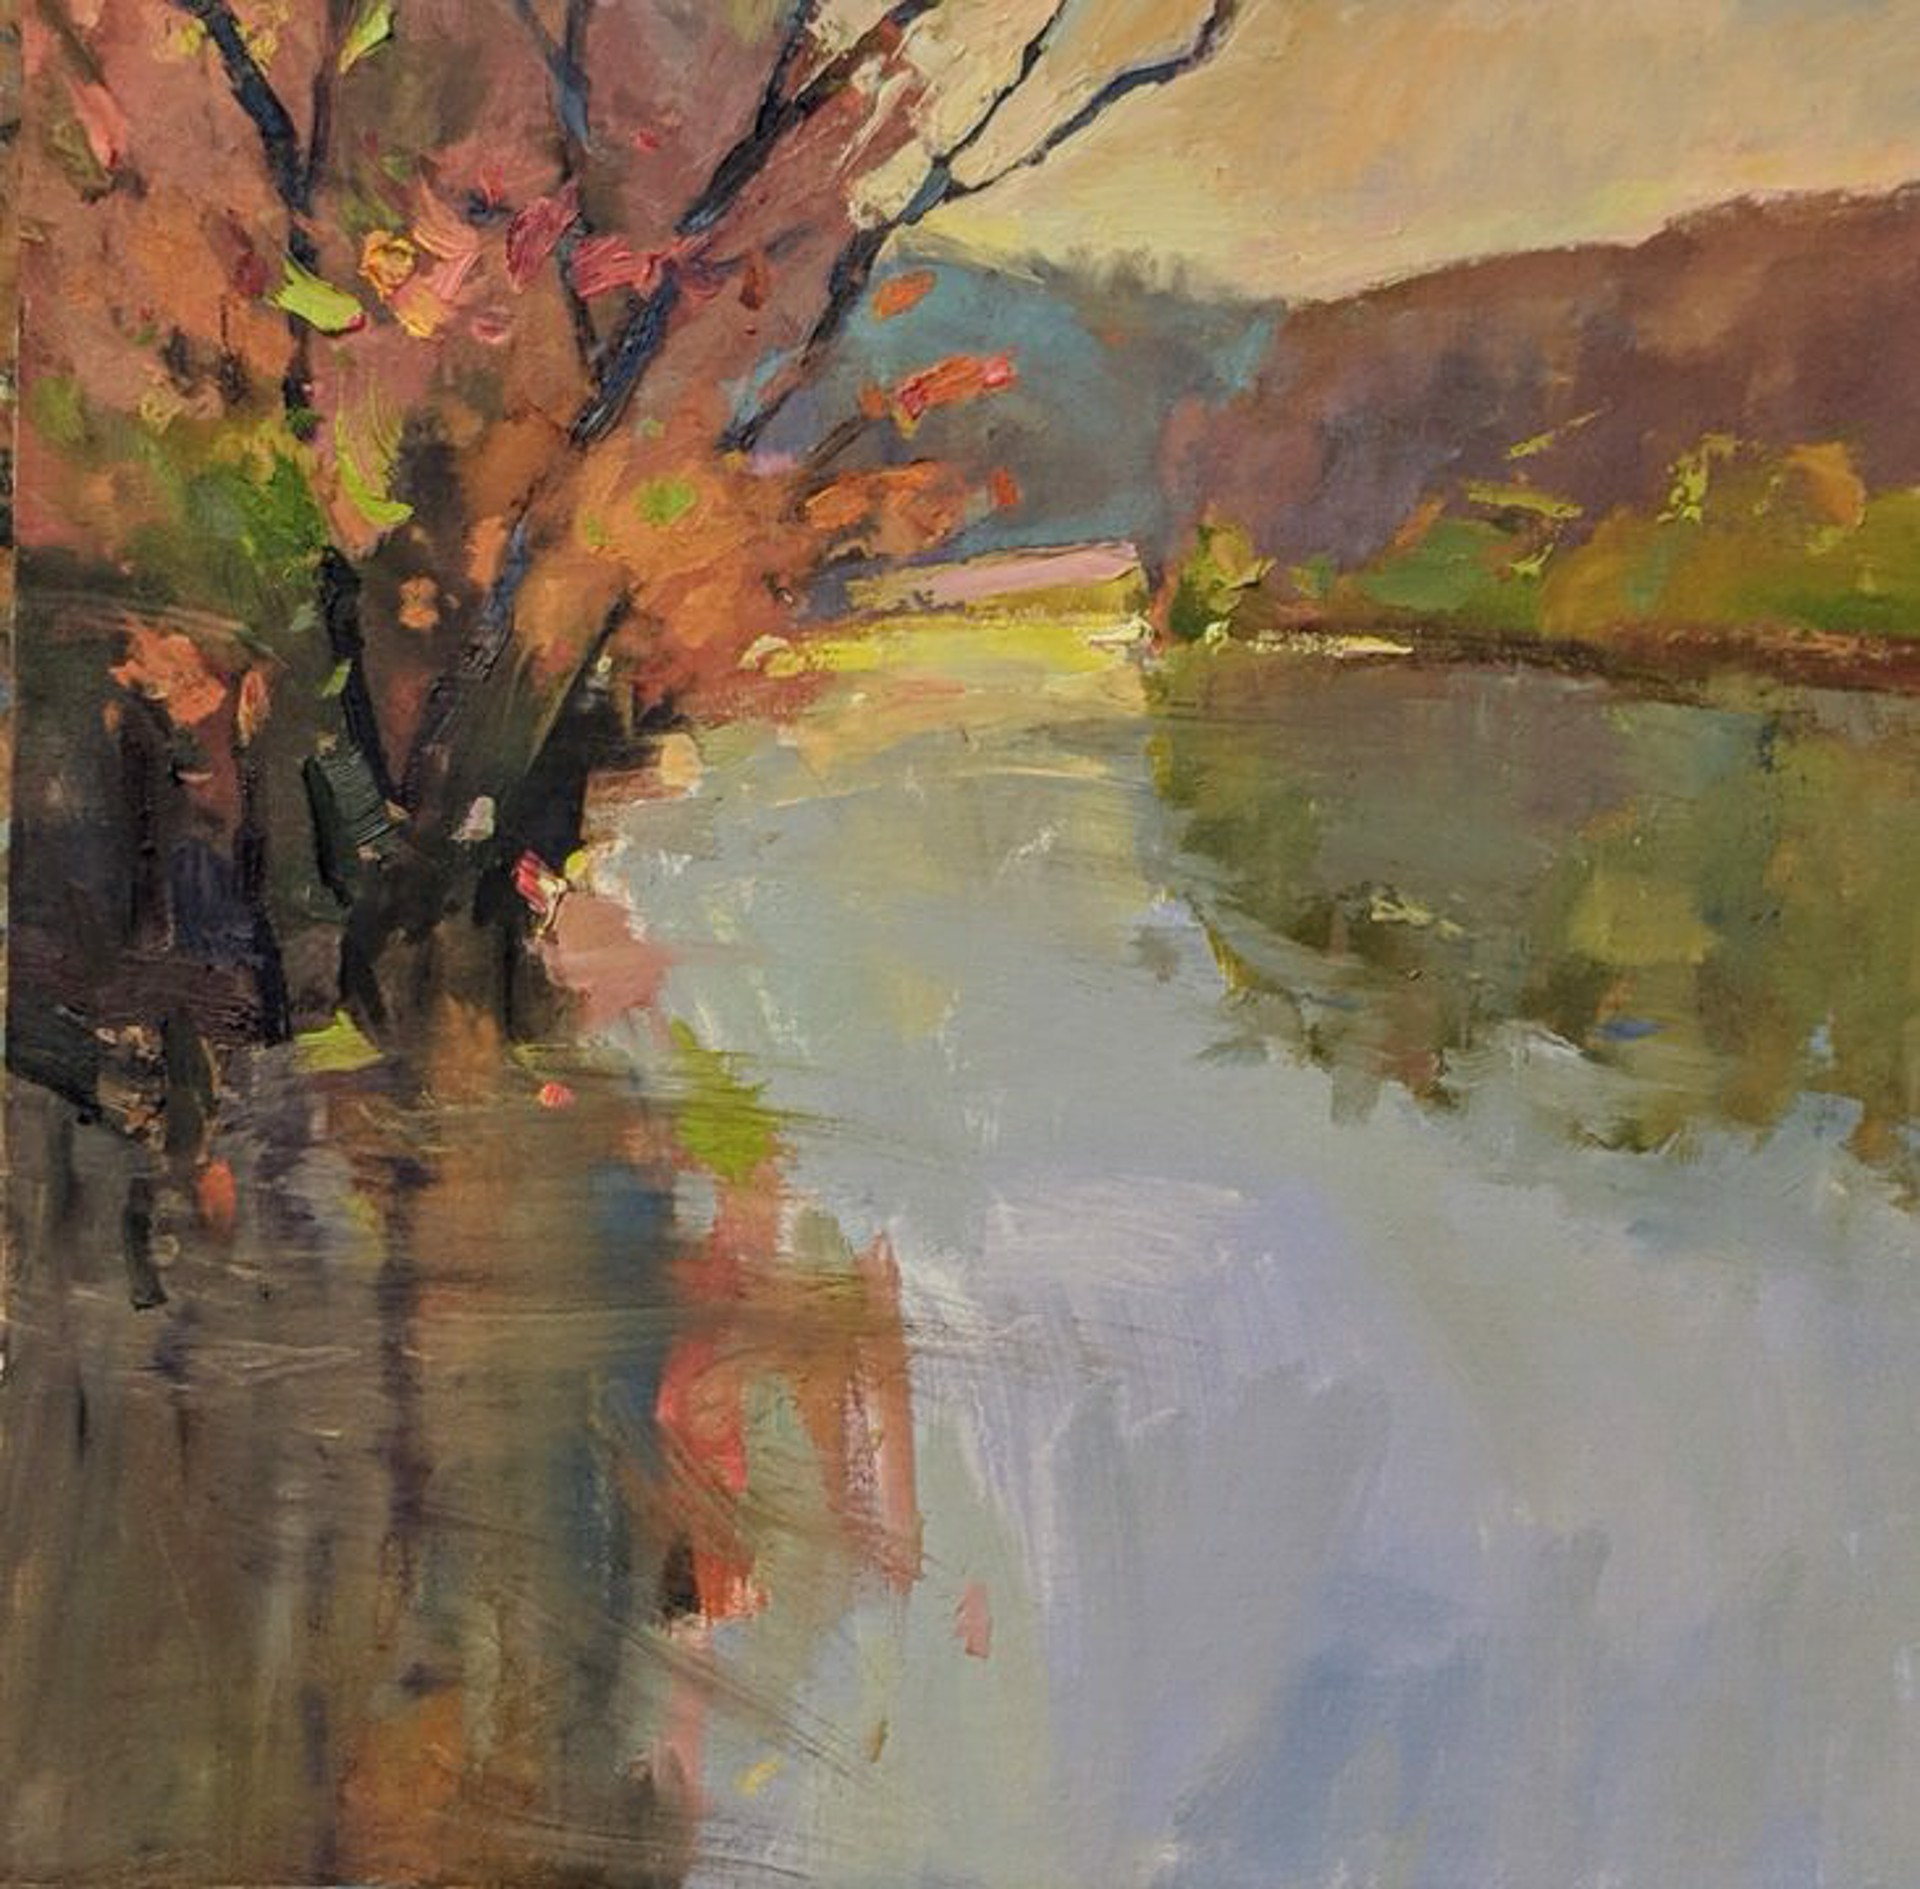 Early Spring on the River by Millie Gosch